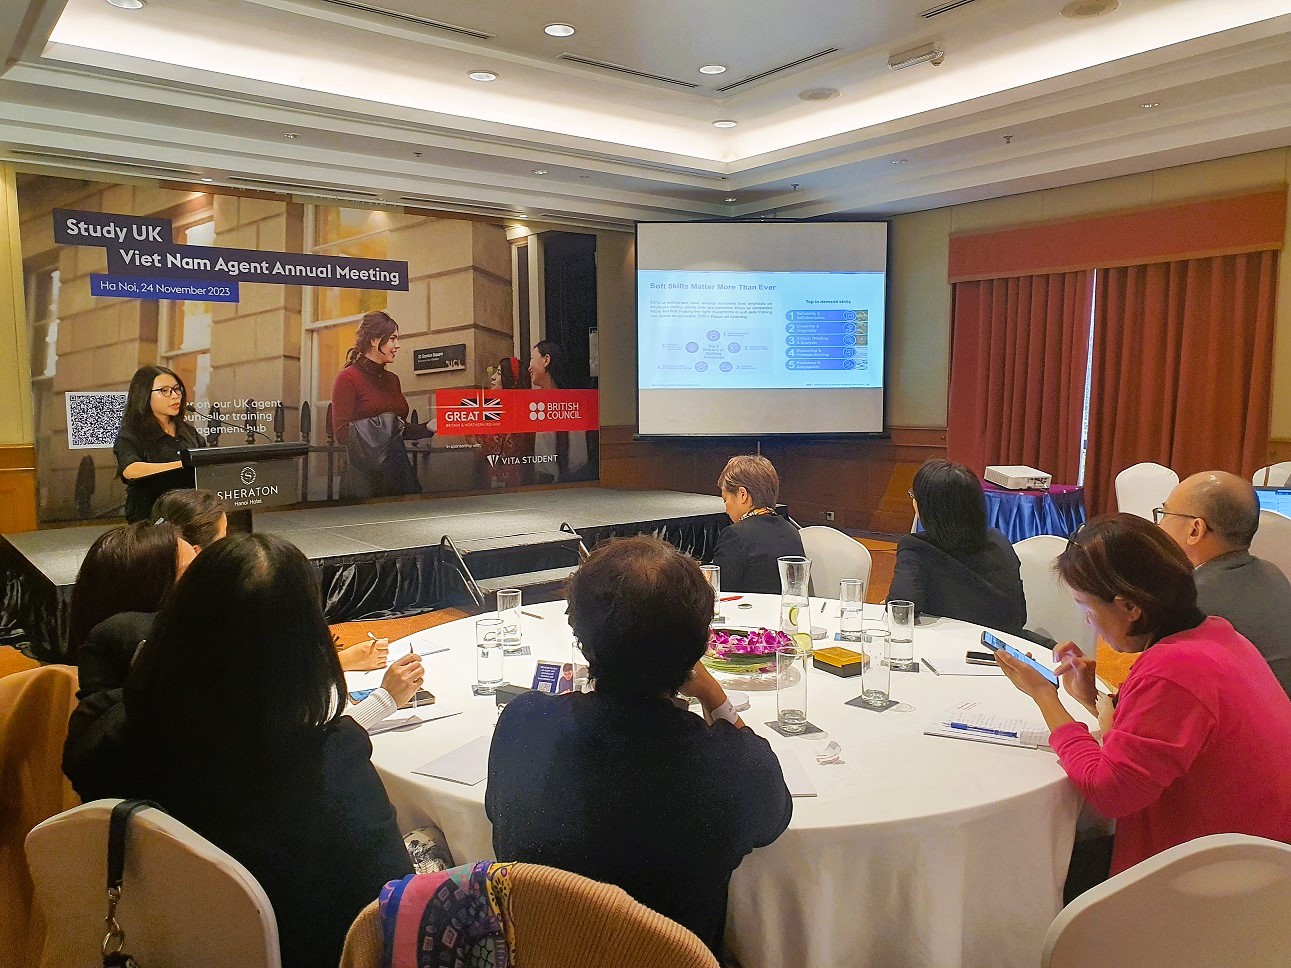 Expert at ManpowerGroup Vietnam shared the current talent shortage in UK and Vietnam and skills-based hiring and importance of reskilling upskilling talents with UK education agents at British Council annual meeting event